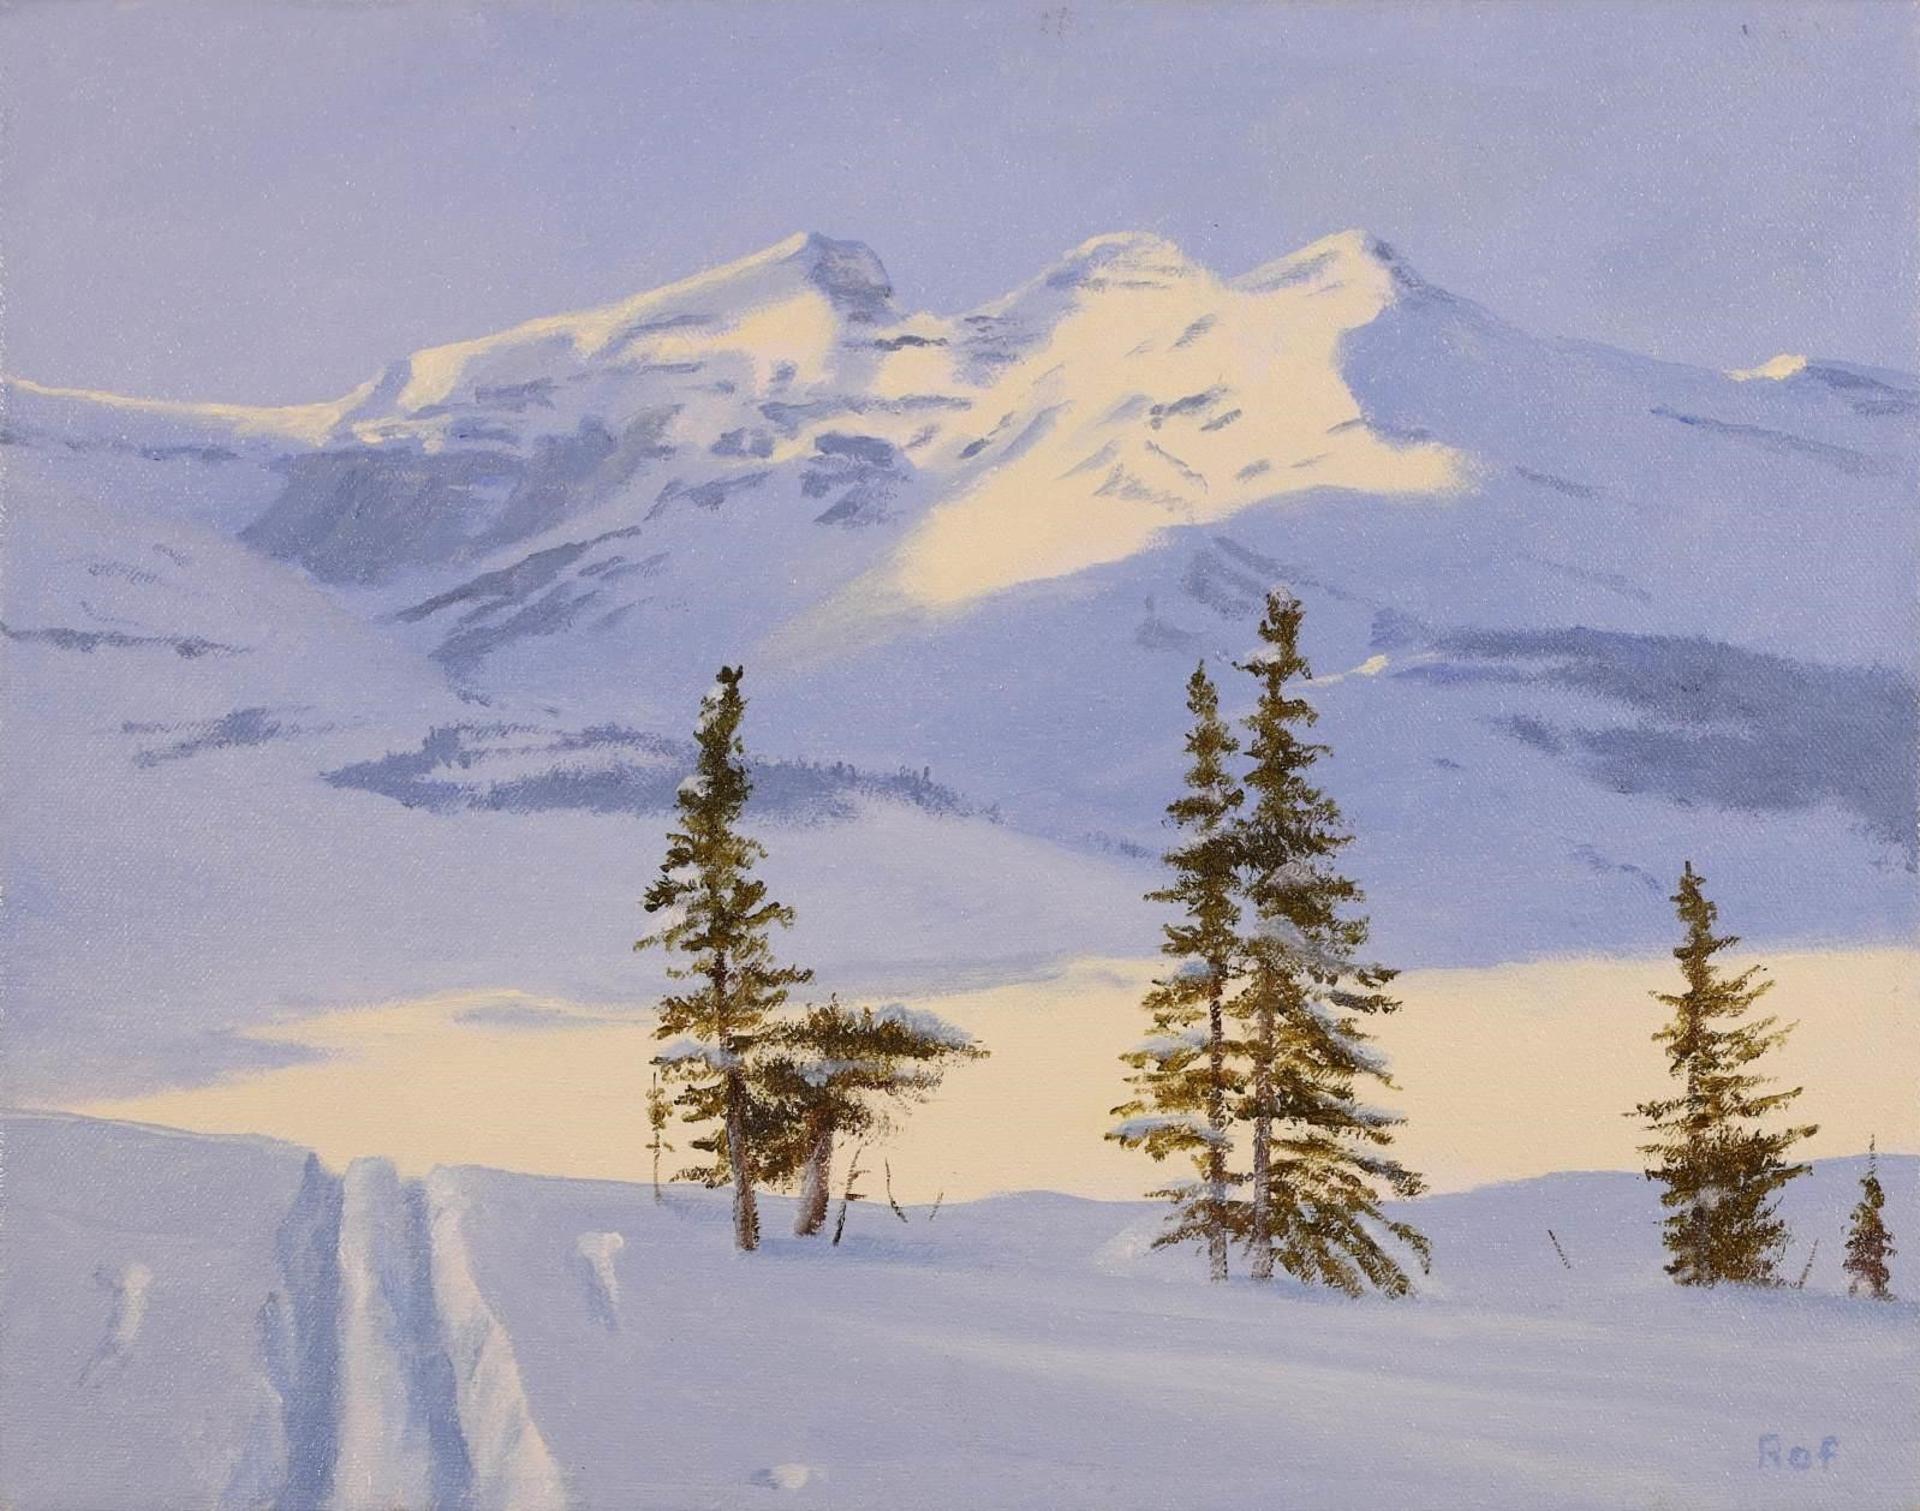 Ted Raftery (1938) - Morning Sun Near Columbia Icefields